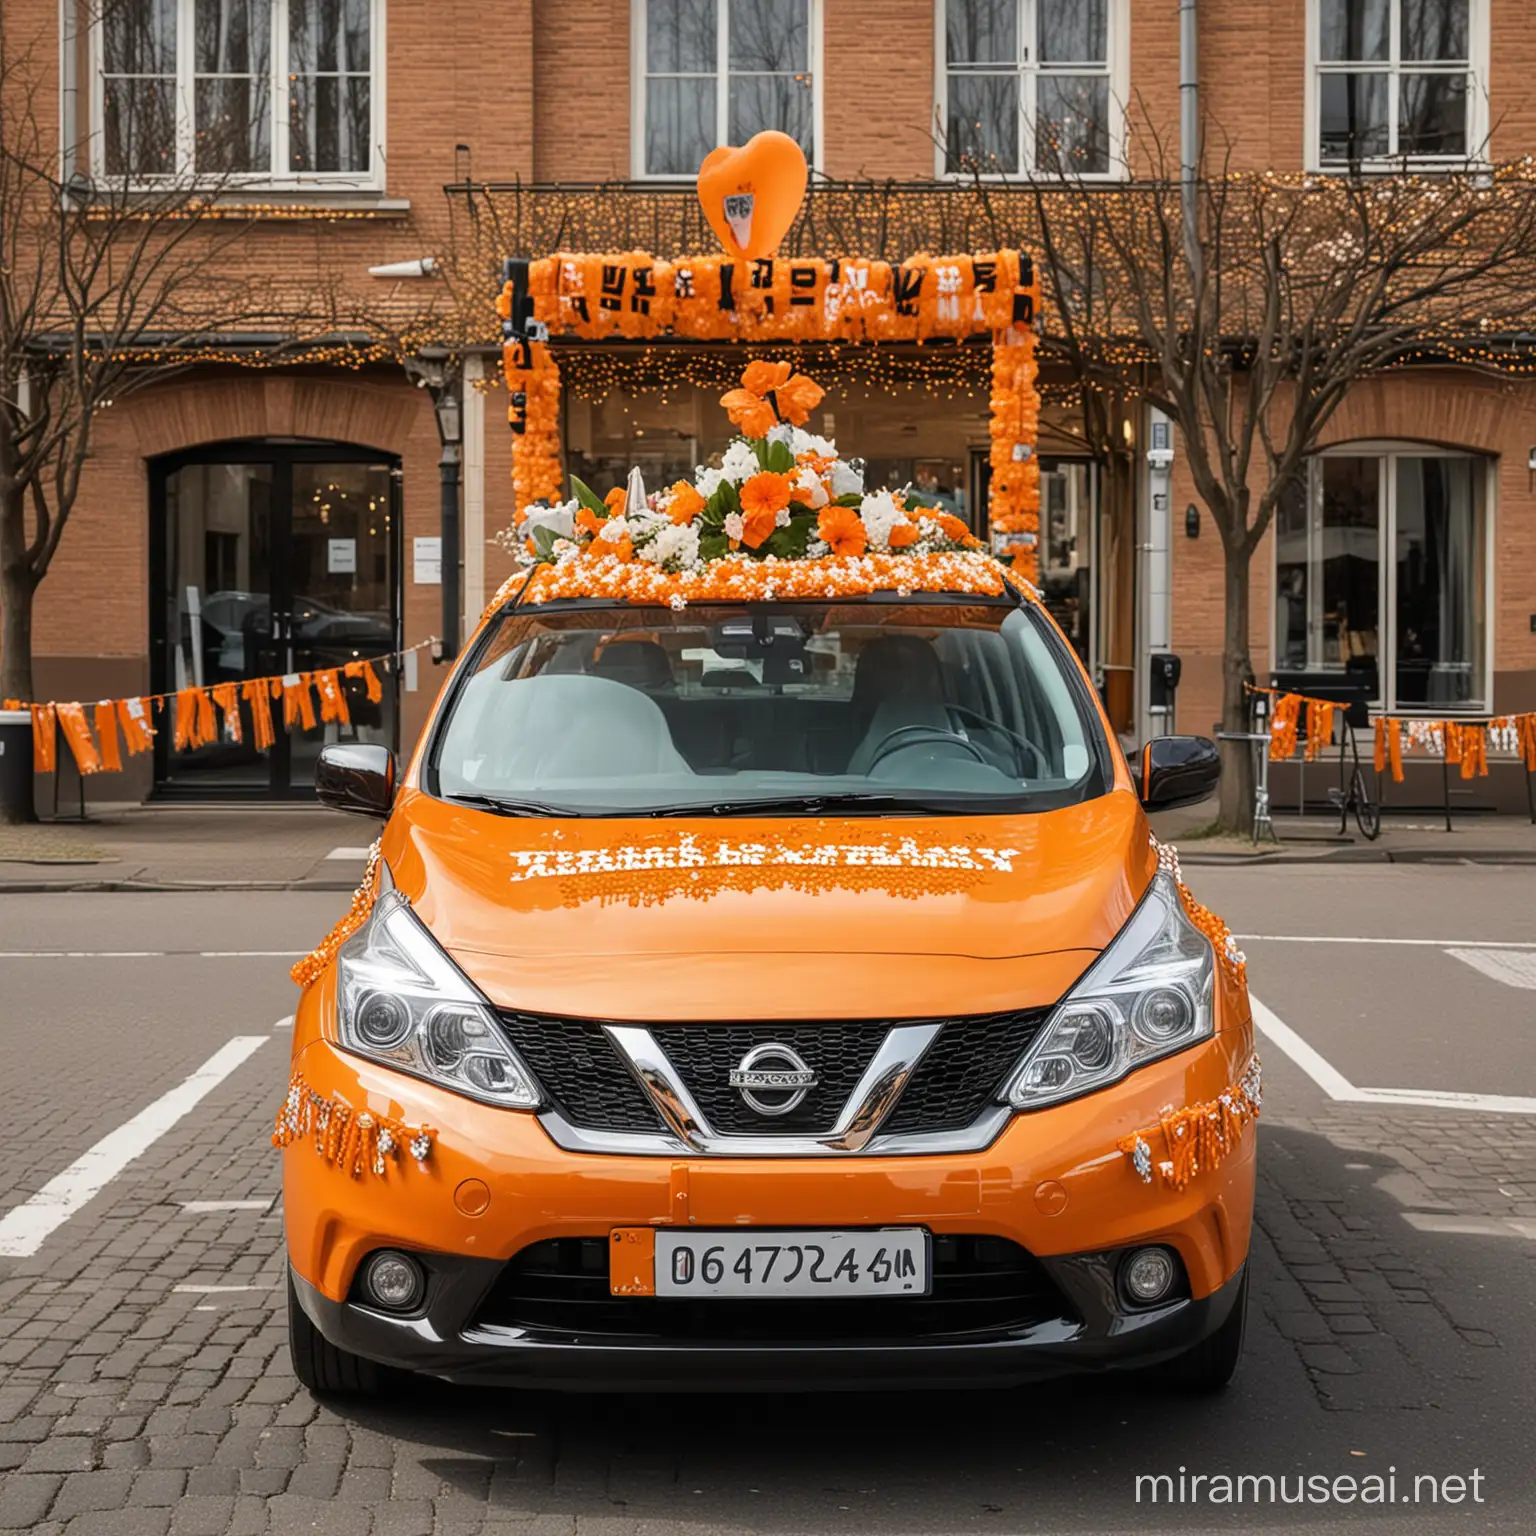 Nissan Car Adorned with Kings Day Decorations in Festive Display